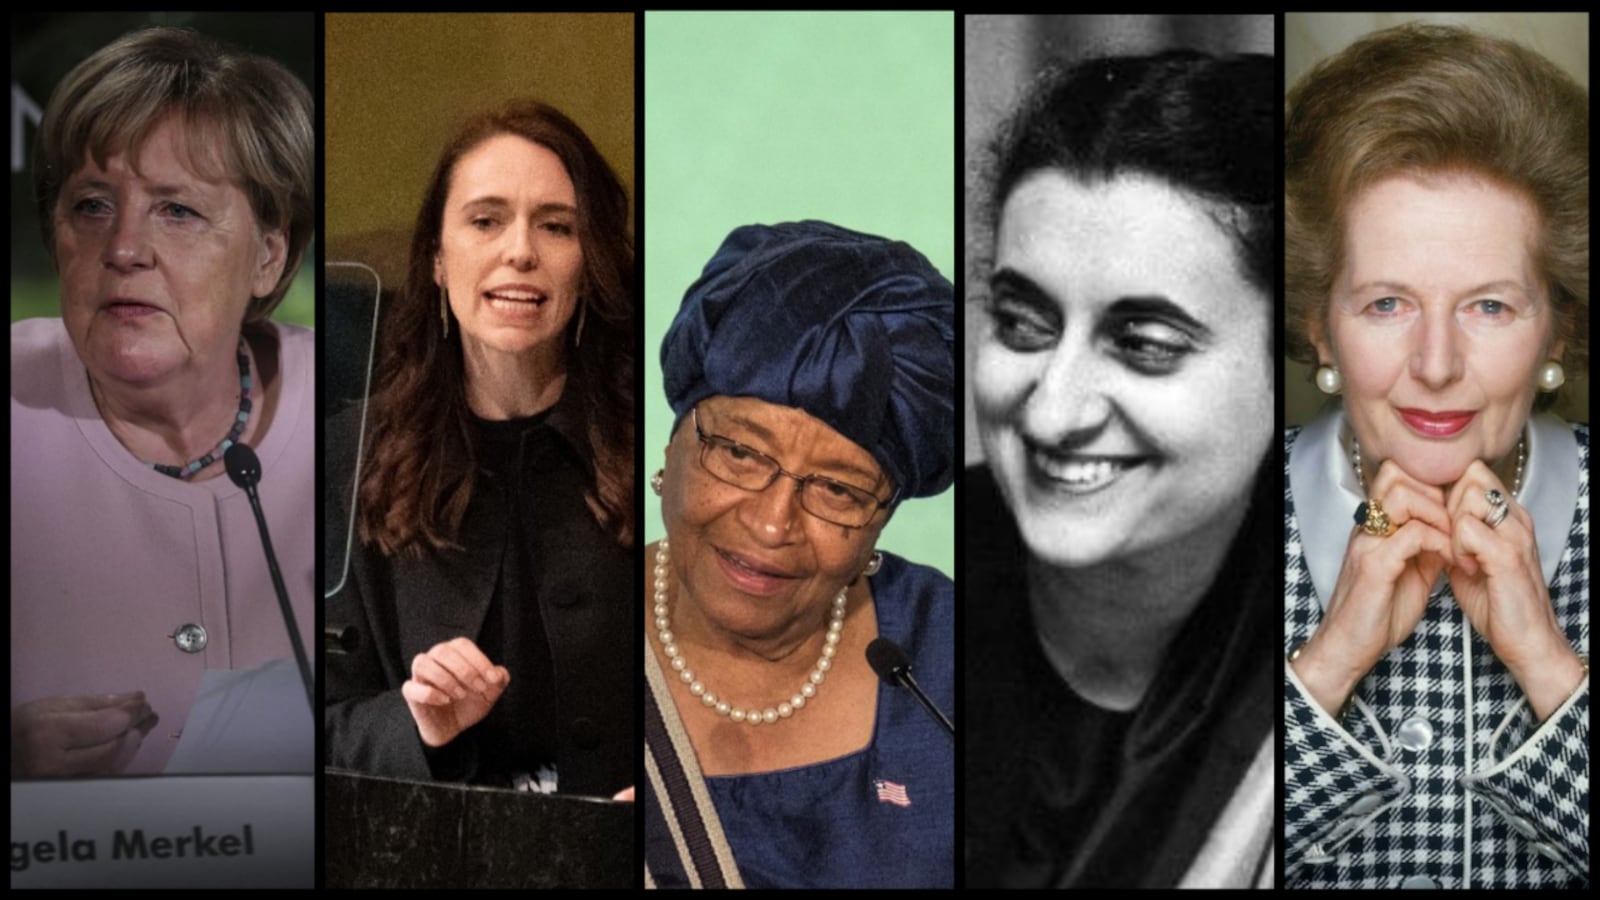 International Women's Day 2023: 5 female world leaders who made a